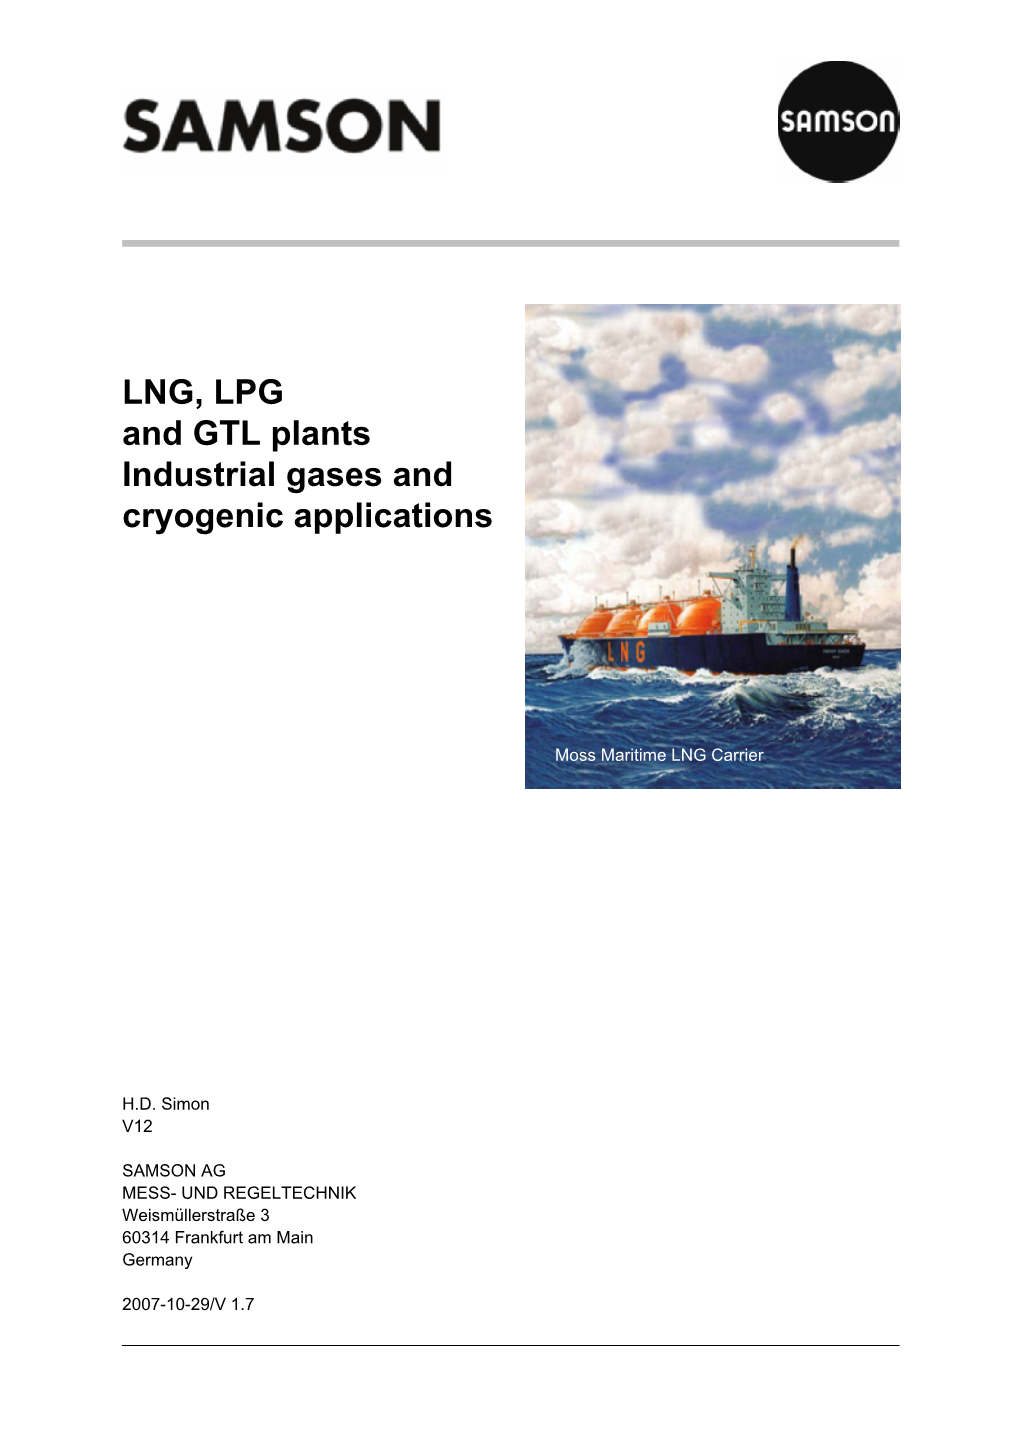 LNG, LPG and GTL Plants Industrial Gases and Cryogenic Applications